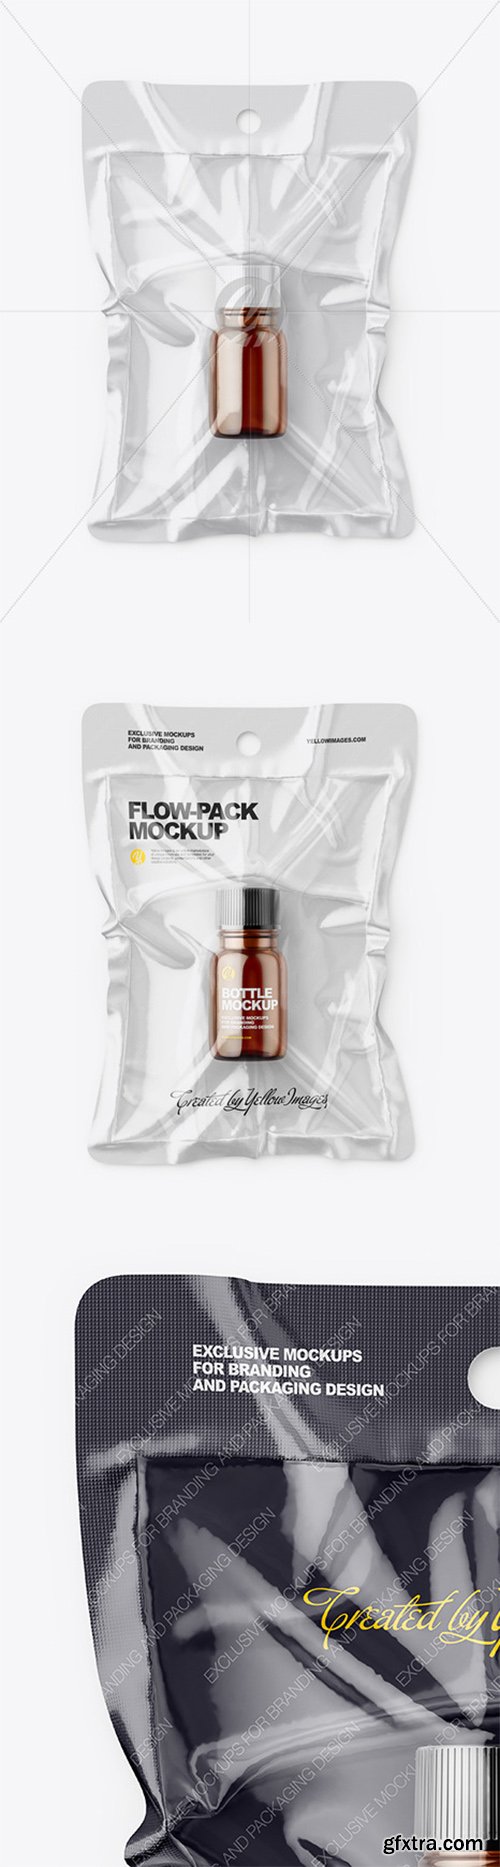 Vacuum Flow-Pack With Small Amber Glass Bottle Mockup - Top View 68364